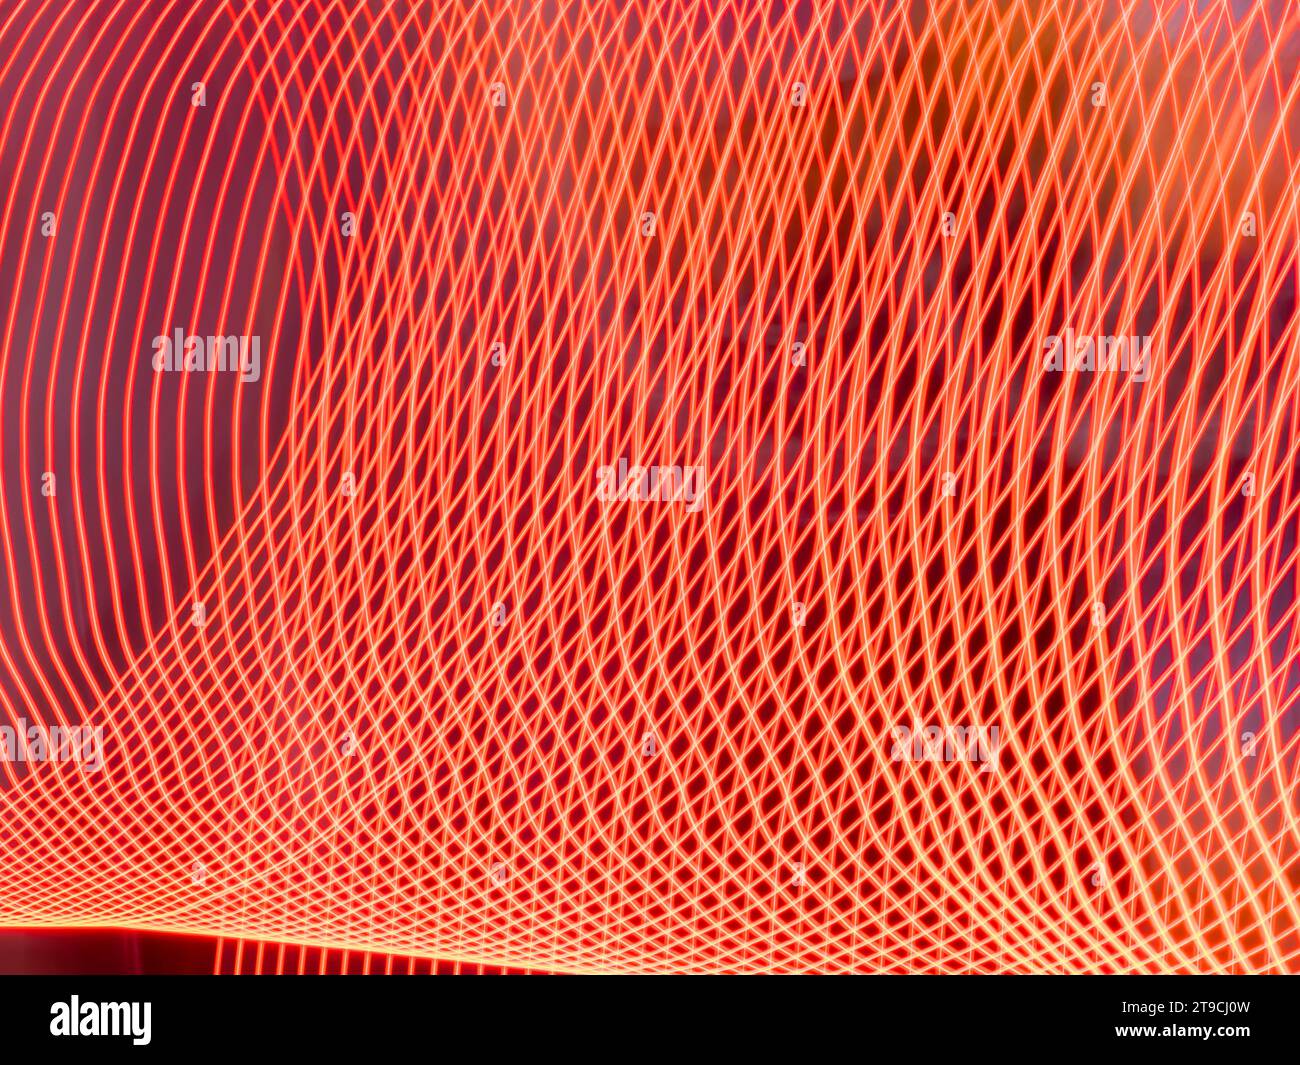 Abstract lines background. Abstract lines texture. Red and orange colors. Stock Photo